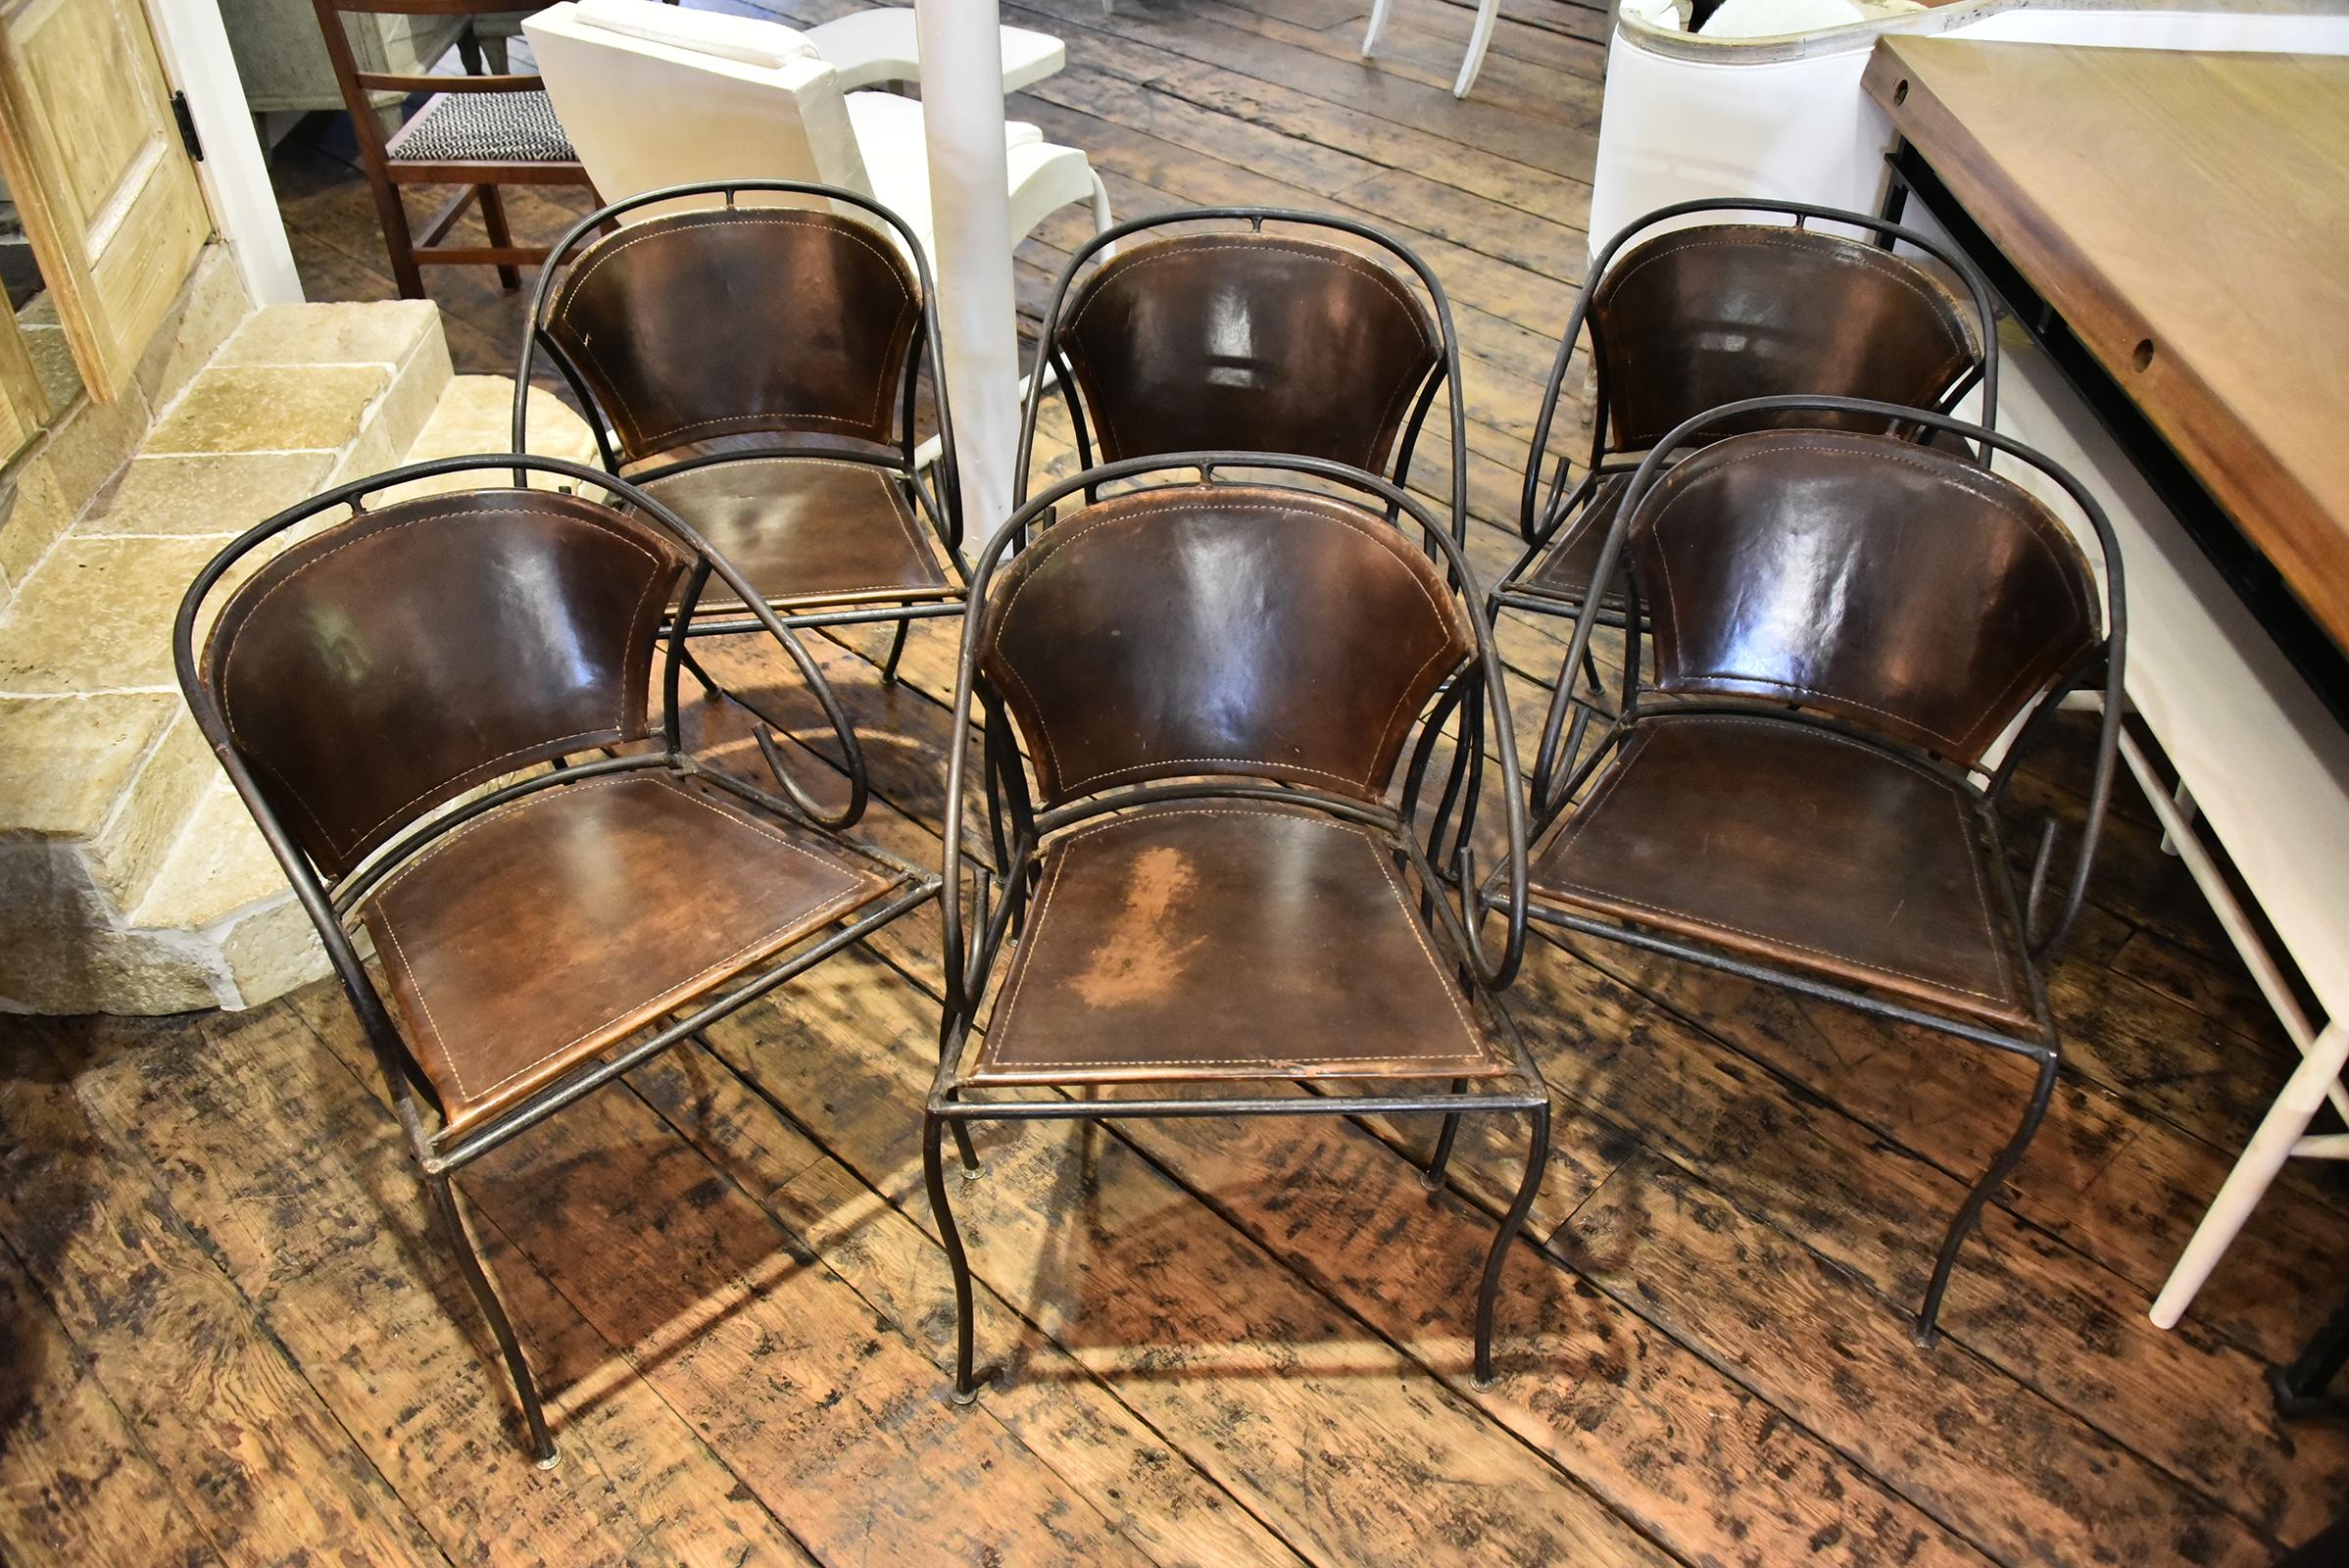 A set of 6 iron and leather Spanish chairs with authentic patina. Signs of age on some of the leather.